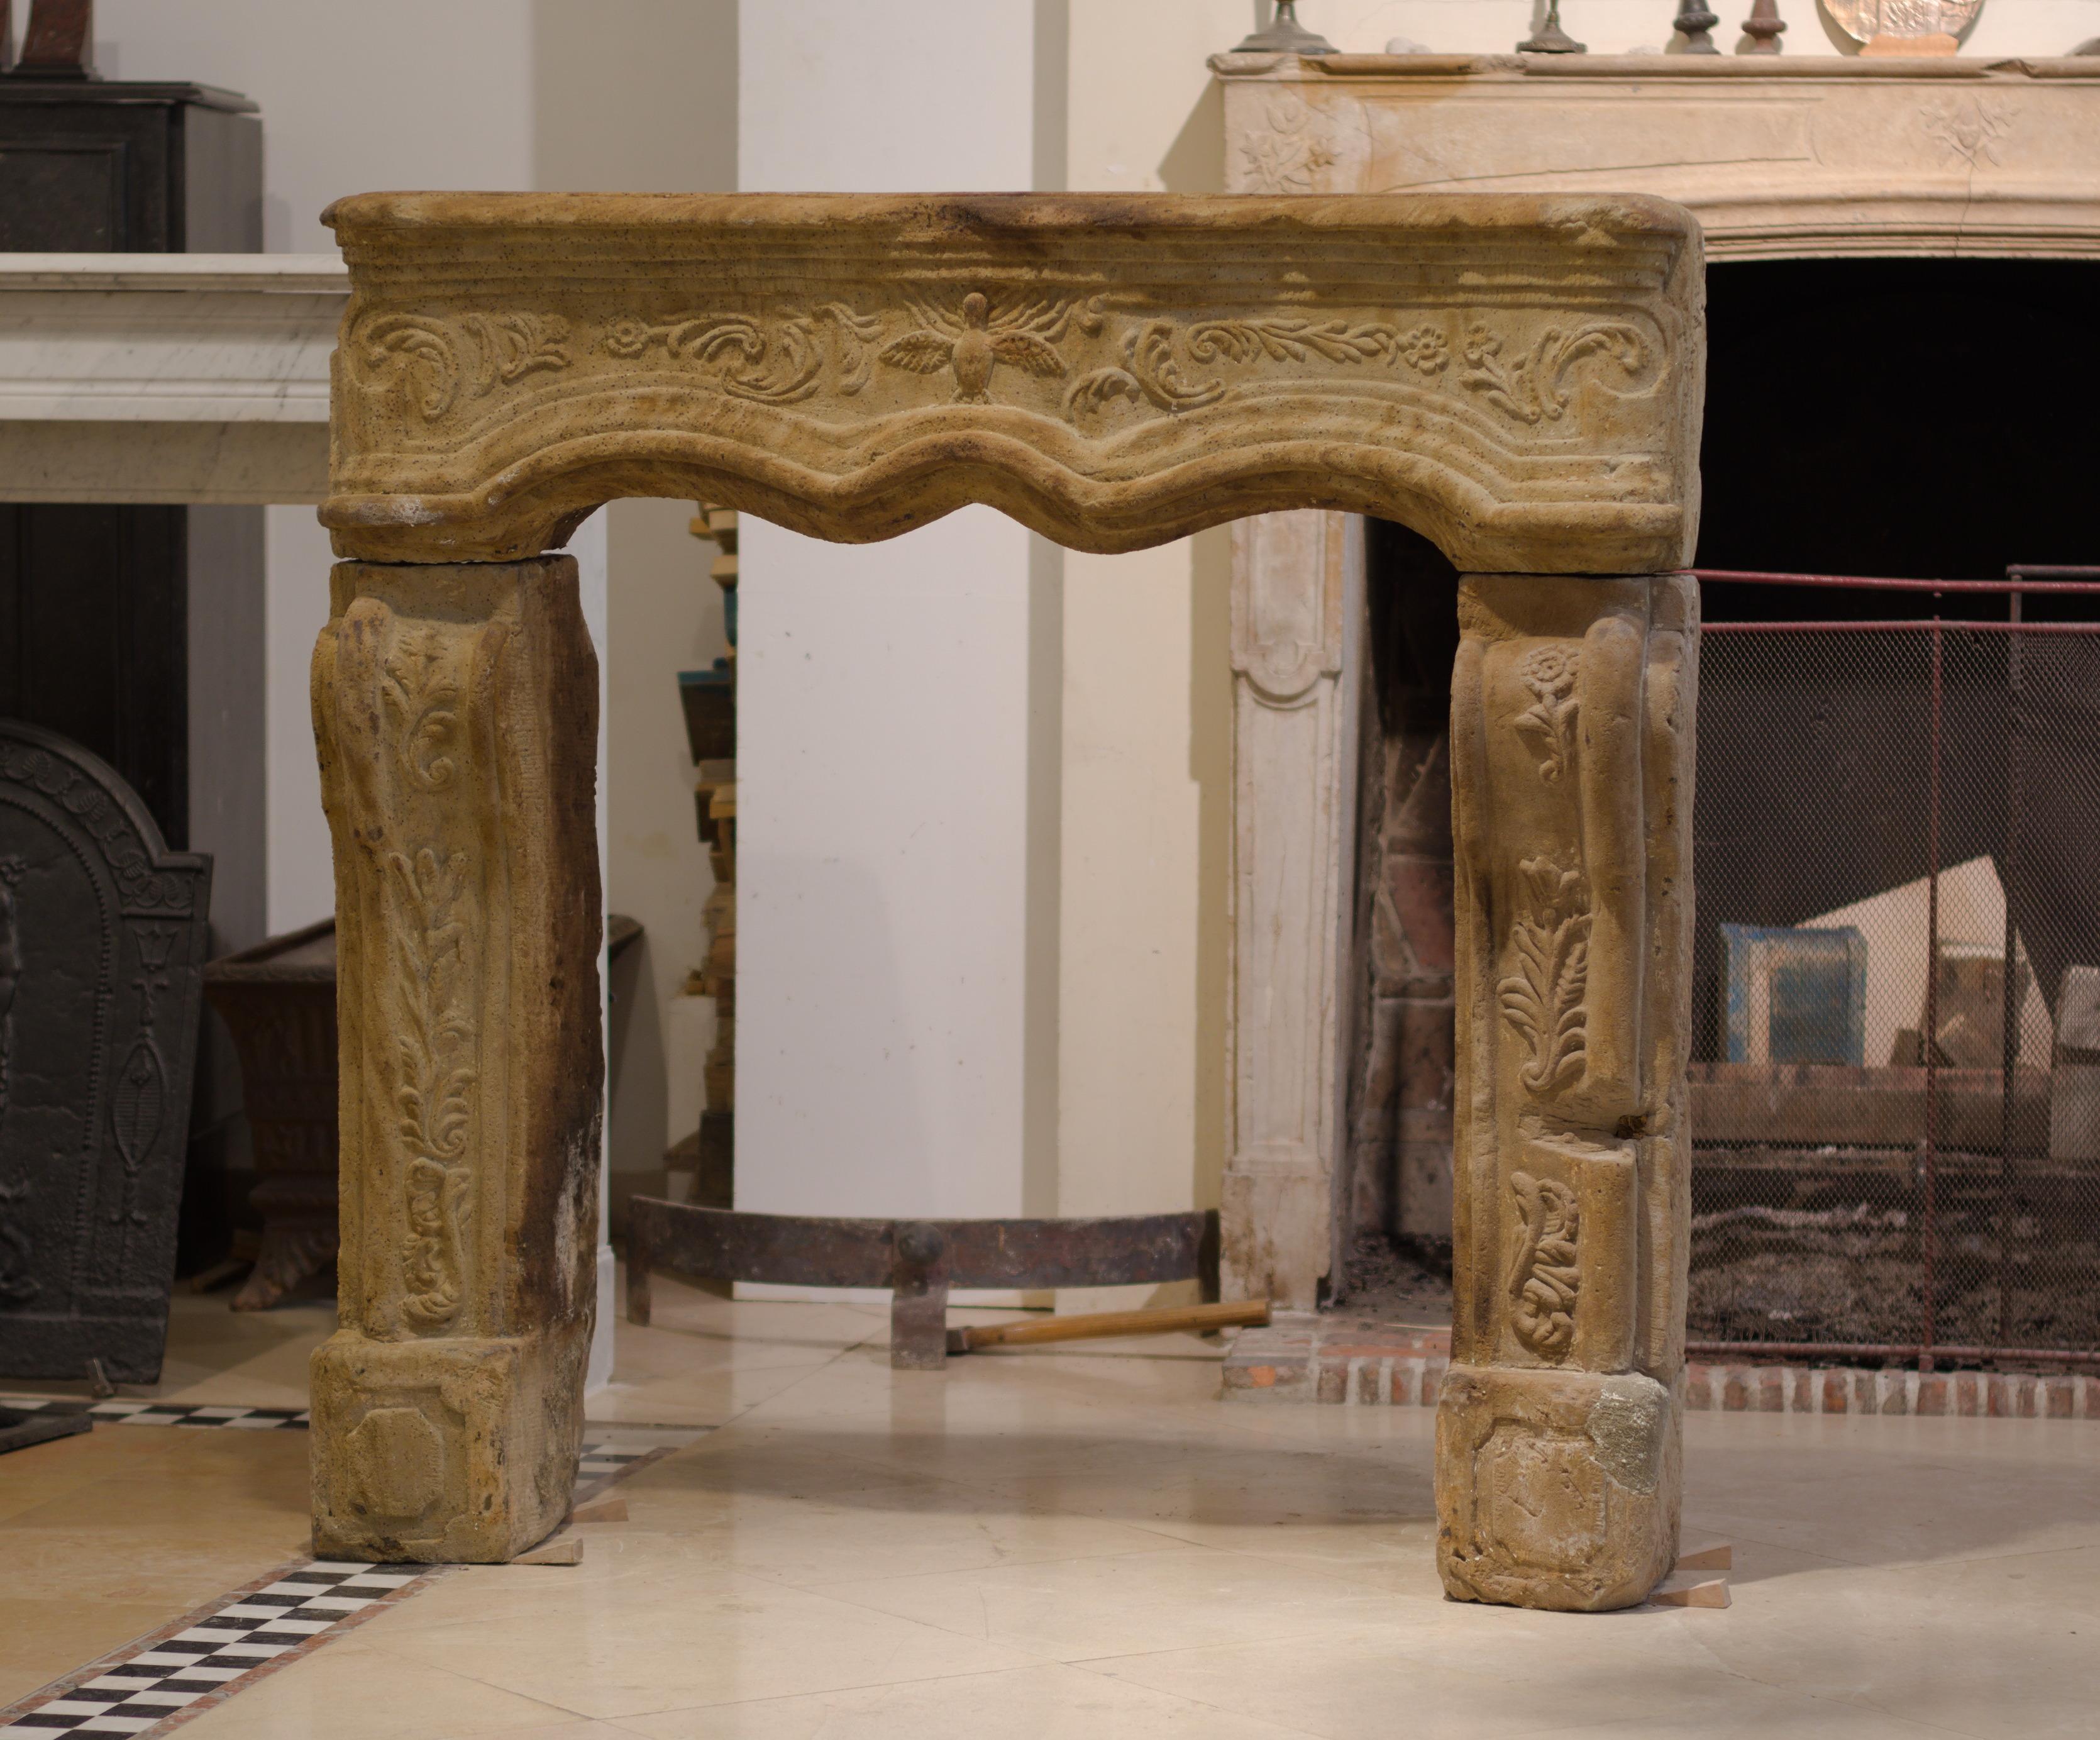 Happy to present this almost square amazingly detailed and warm colored French Régence fireplace from the late 18th century.
Its clear to see this mantel had a hard life, is has multiple big old restorations and some damages. The right leg might